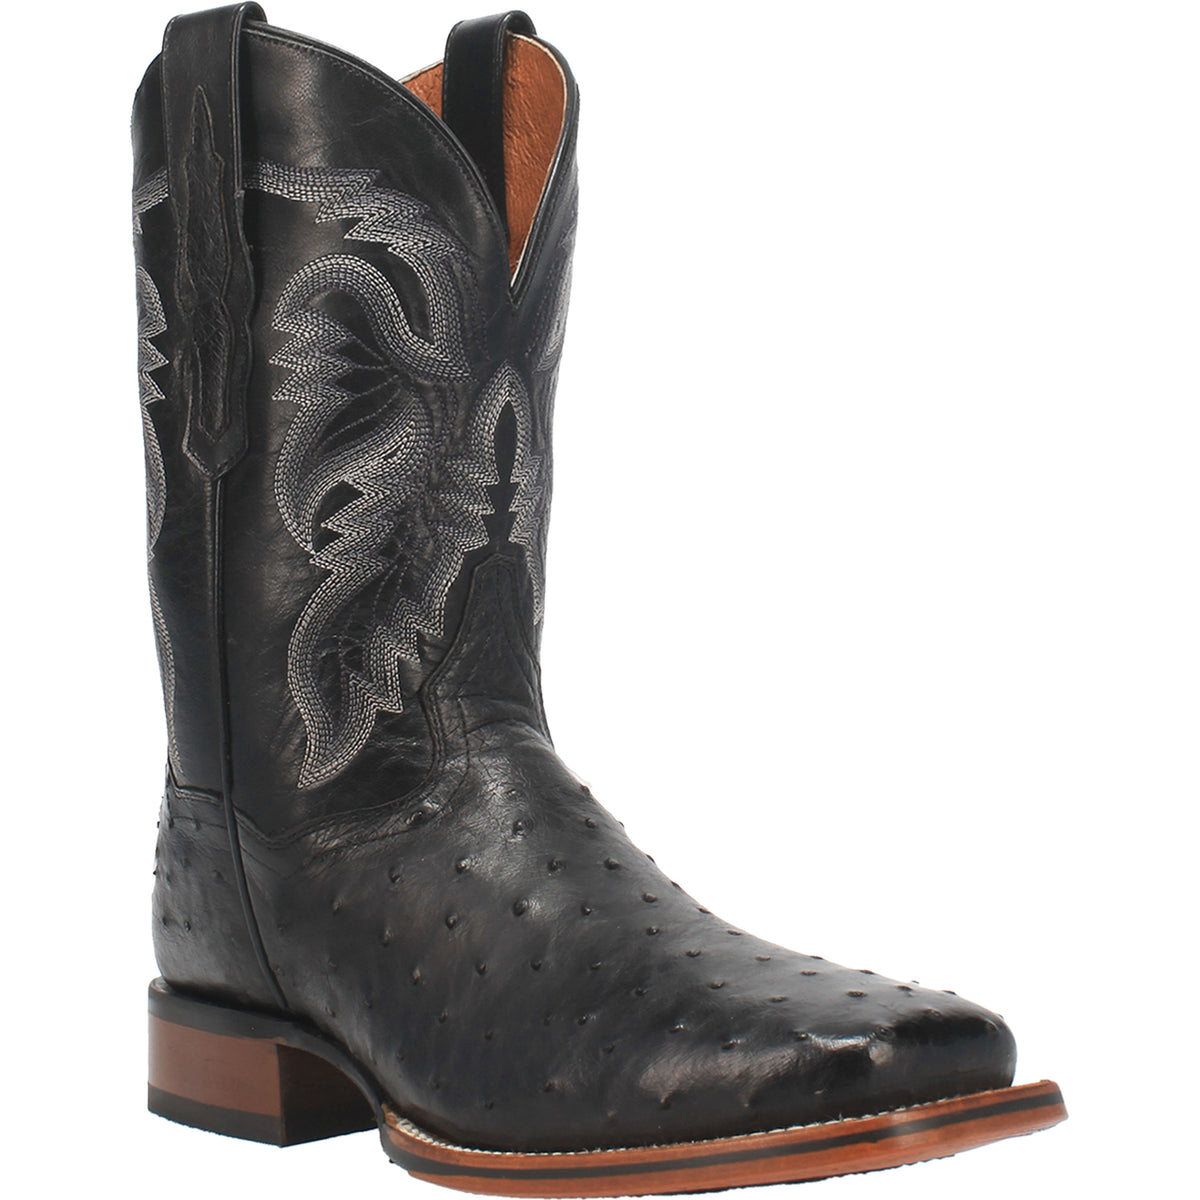 ALAMOSA FULL QUILL OSTRICH BOOT Cover